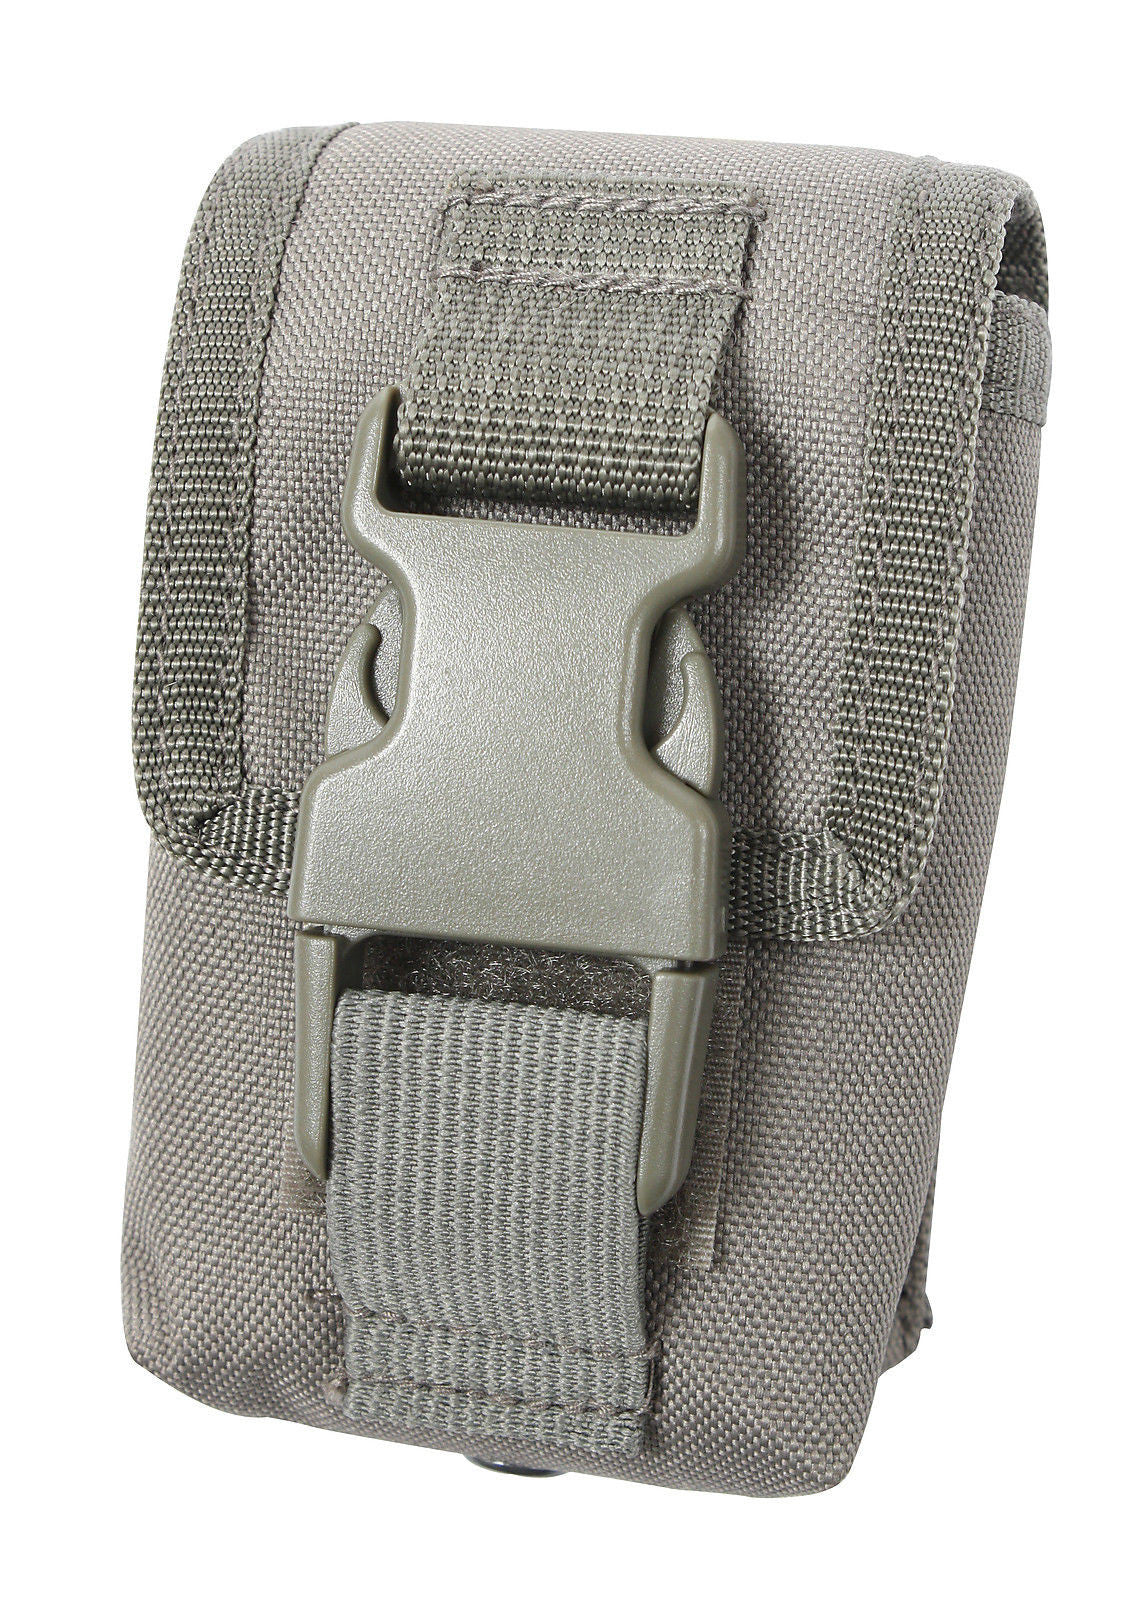 MOLLE Compact Pouch Polyester Compass GPS Electronics Phone Hiking Pouches